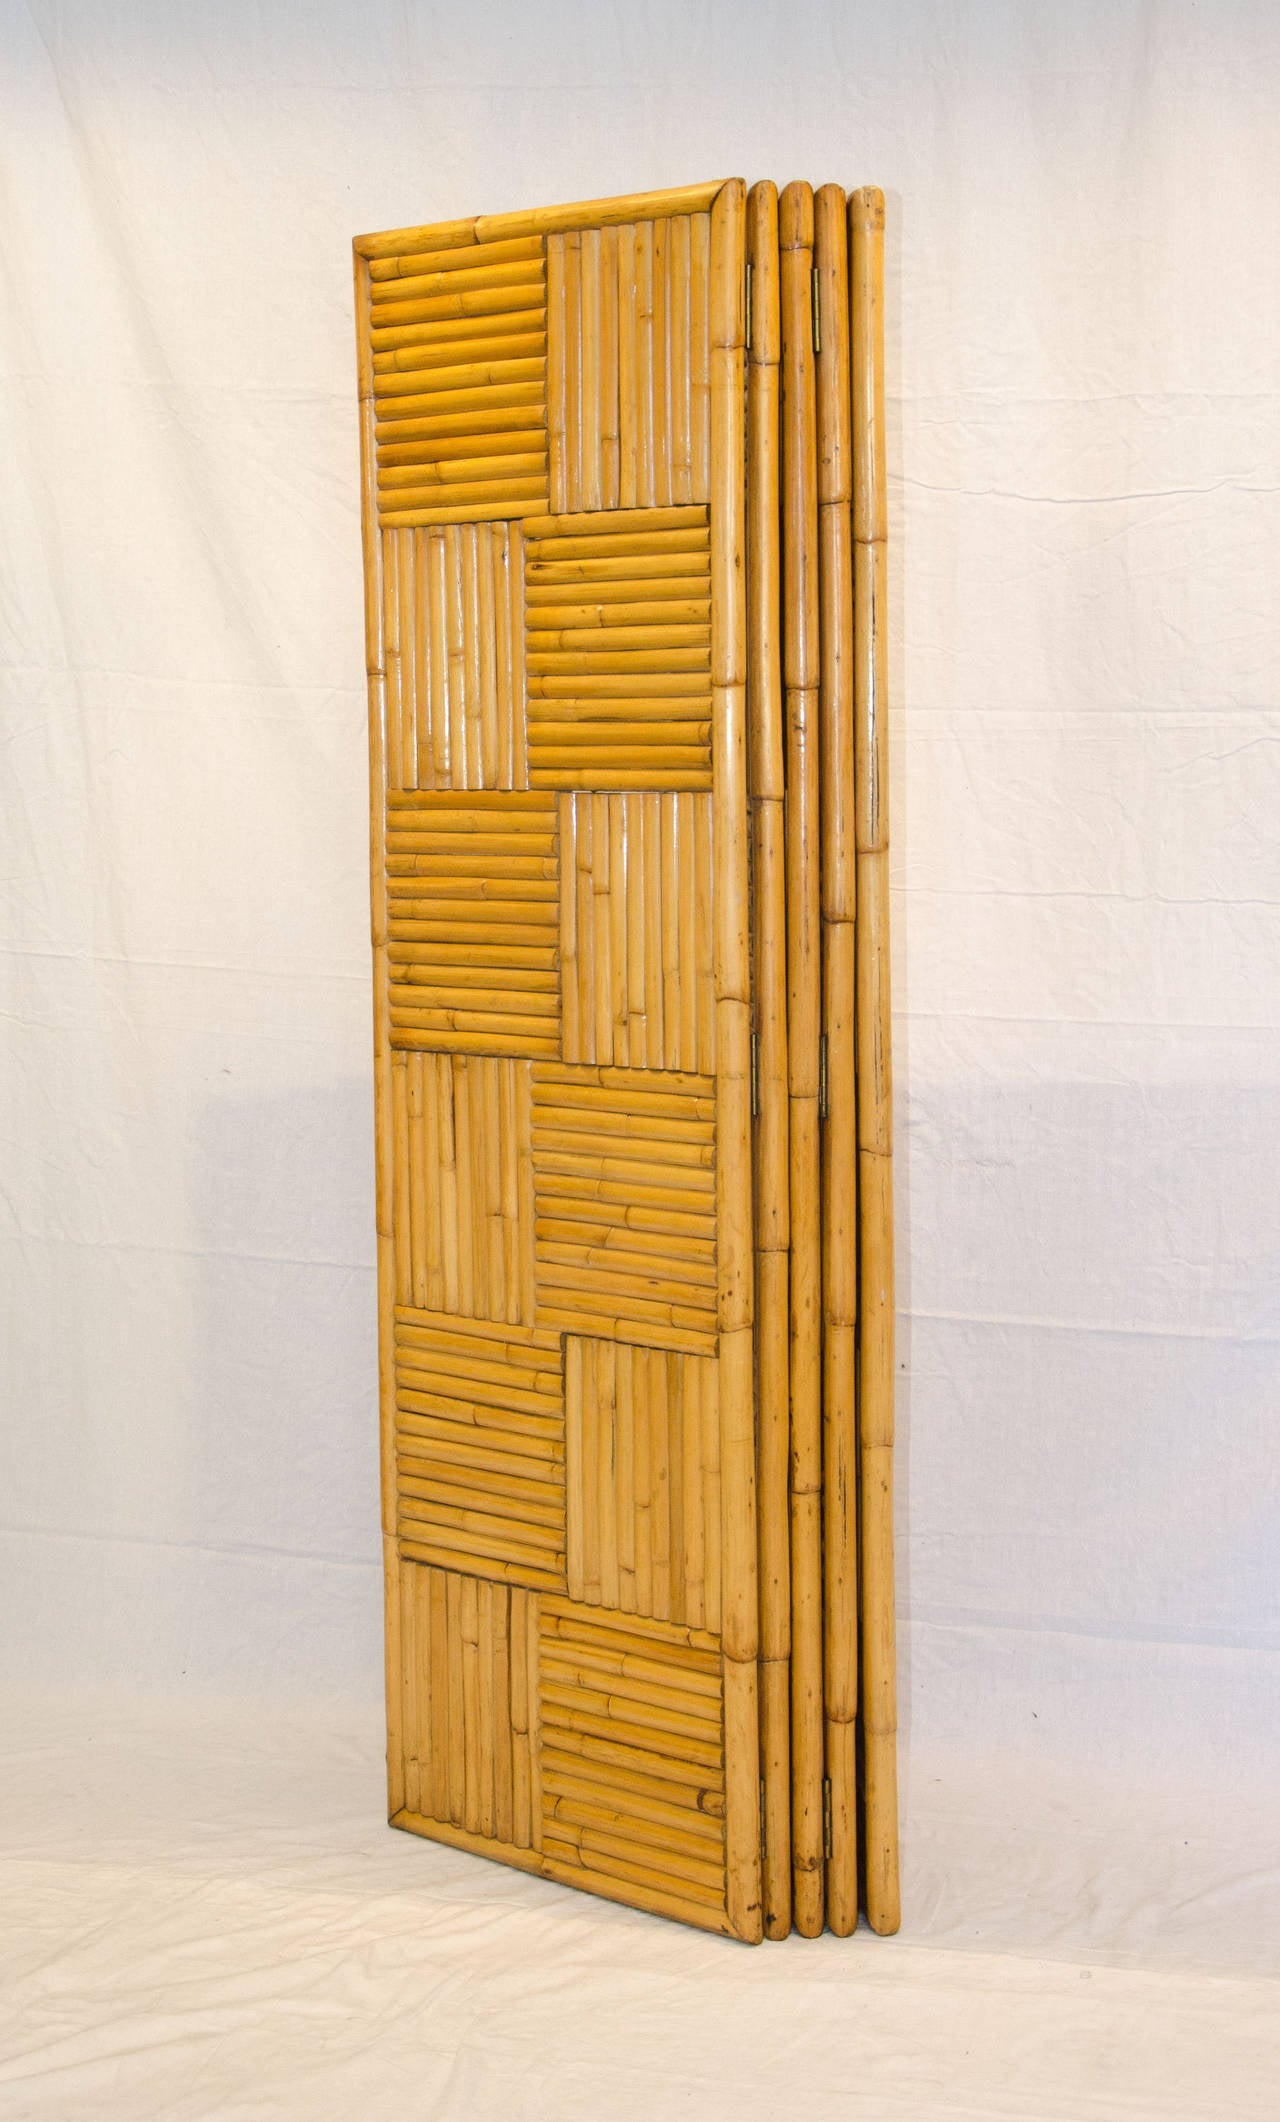 Very nice five panel rattan screen very useful as a room divider or for separating a part of a space, would be great in a tropical or tiki atmosphere, as well as an Asian motif. Each panel is 20